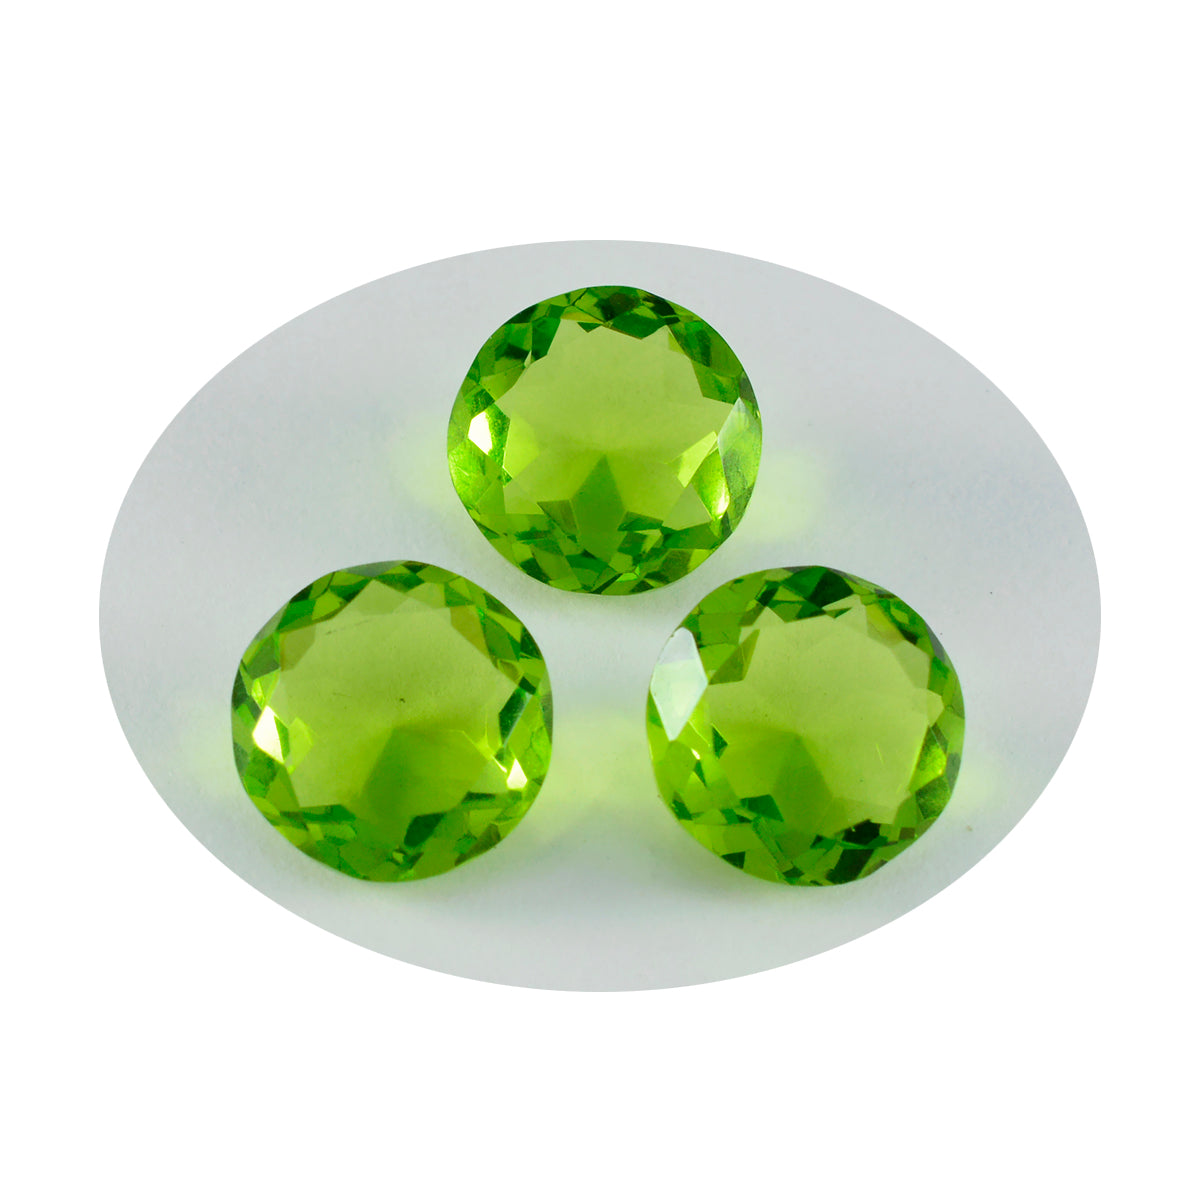 Riyogems 1PC Green Peridot CZ Faceted 15x15 mm Round Shape handsome Quality Stone